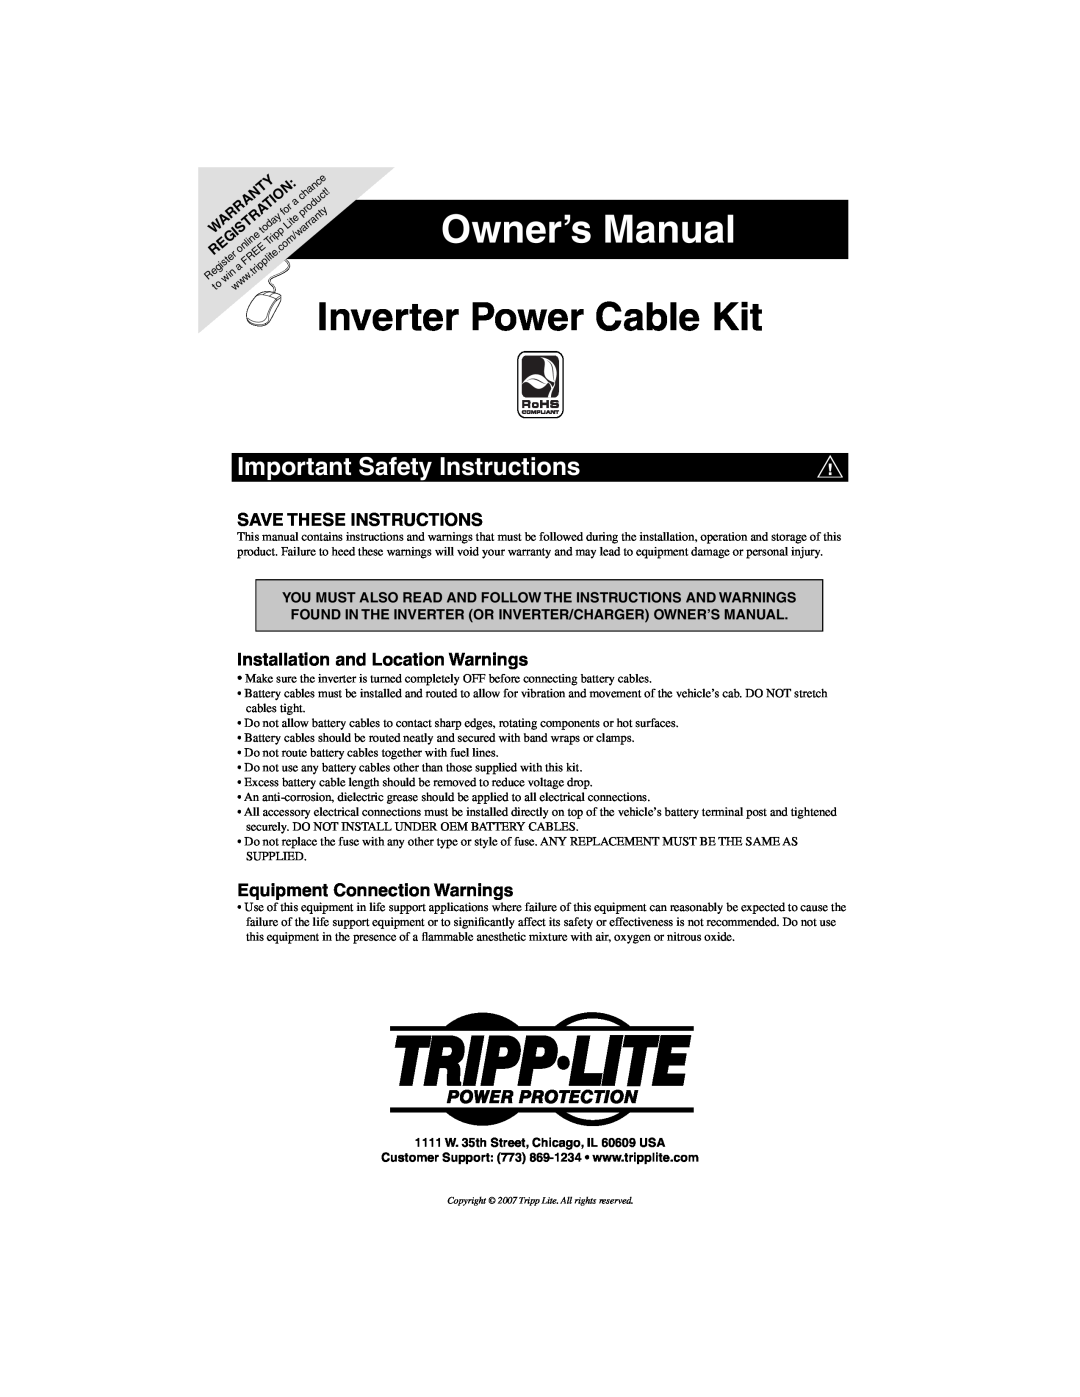 Tripp Lite Inverter Power Cable Kit warranty Important Safety Instructions, Save These Instructions 